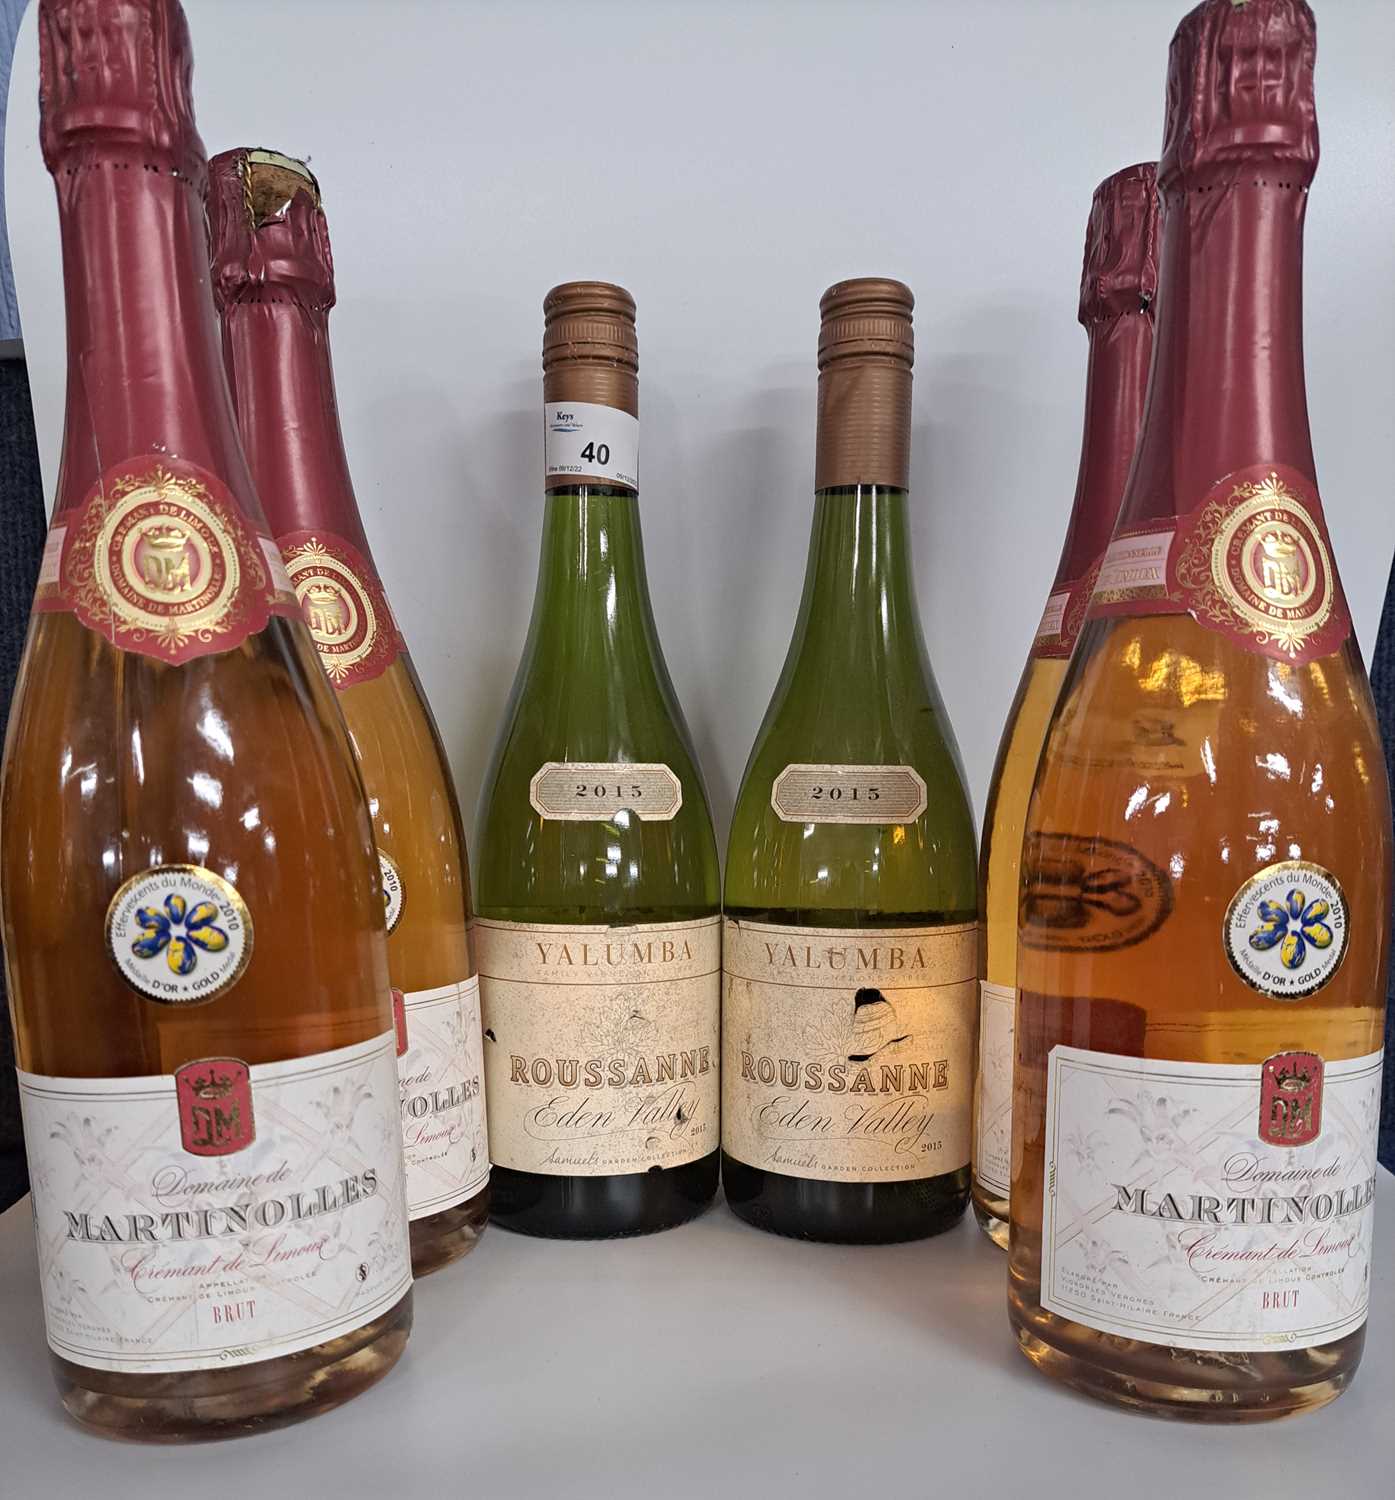 Four bottles of Martinolles Brut together with two bottles of Roussanne Eden Valley 2015 (6)